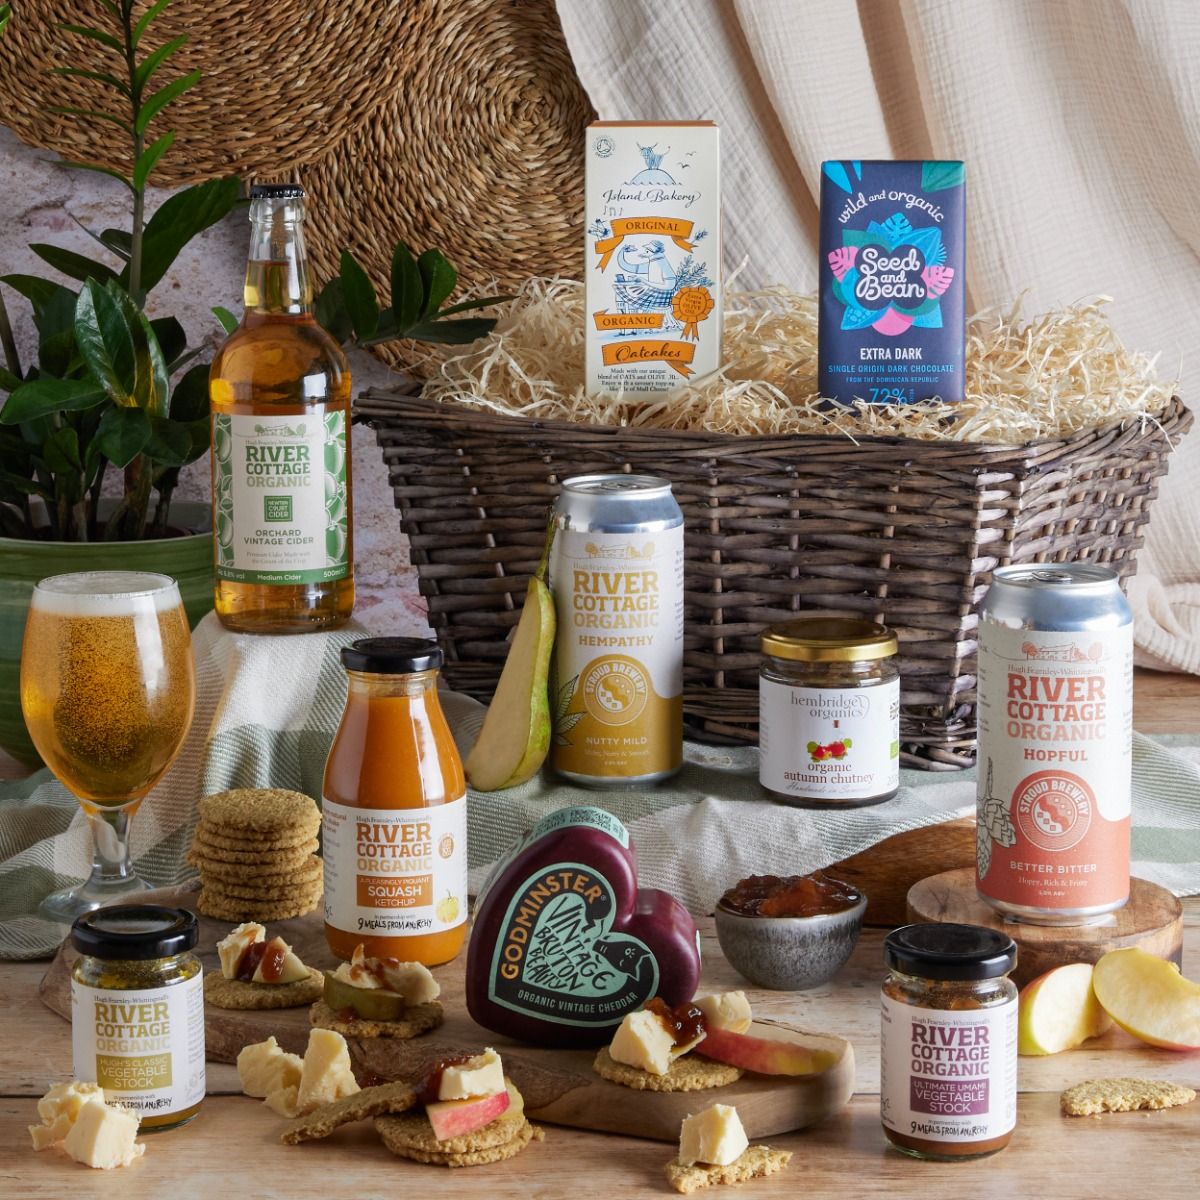 A Taste of River Cottage Hamper with contents on display - a organic Christmas hamper idea